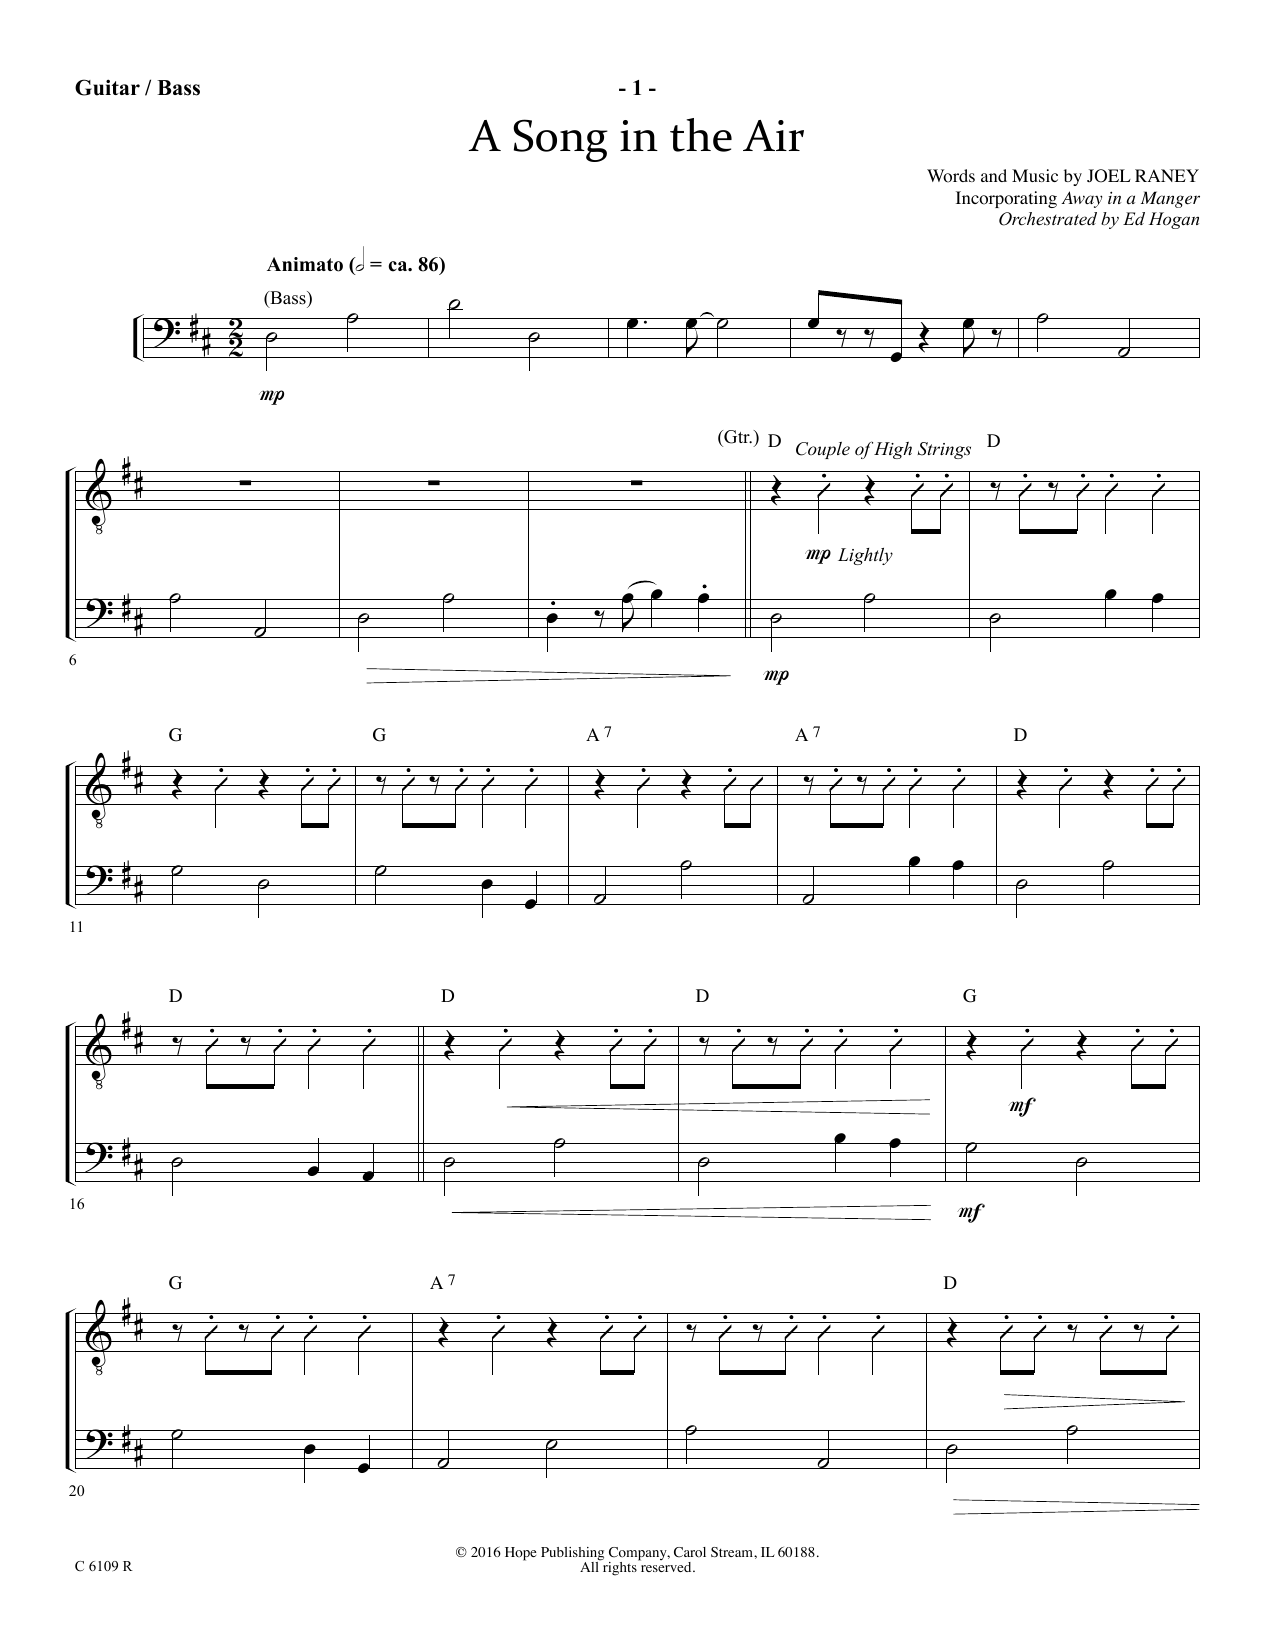 Download Joel Raney A Song In The Air - Acoustic Guitar/Ele Sheet Music